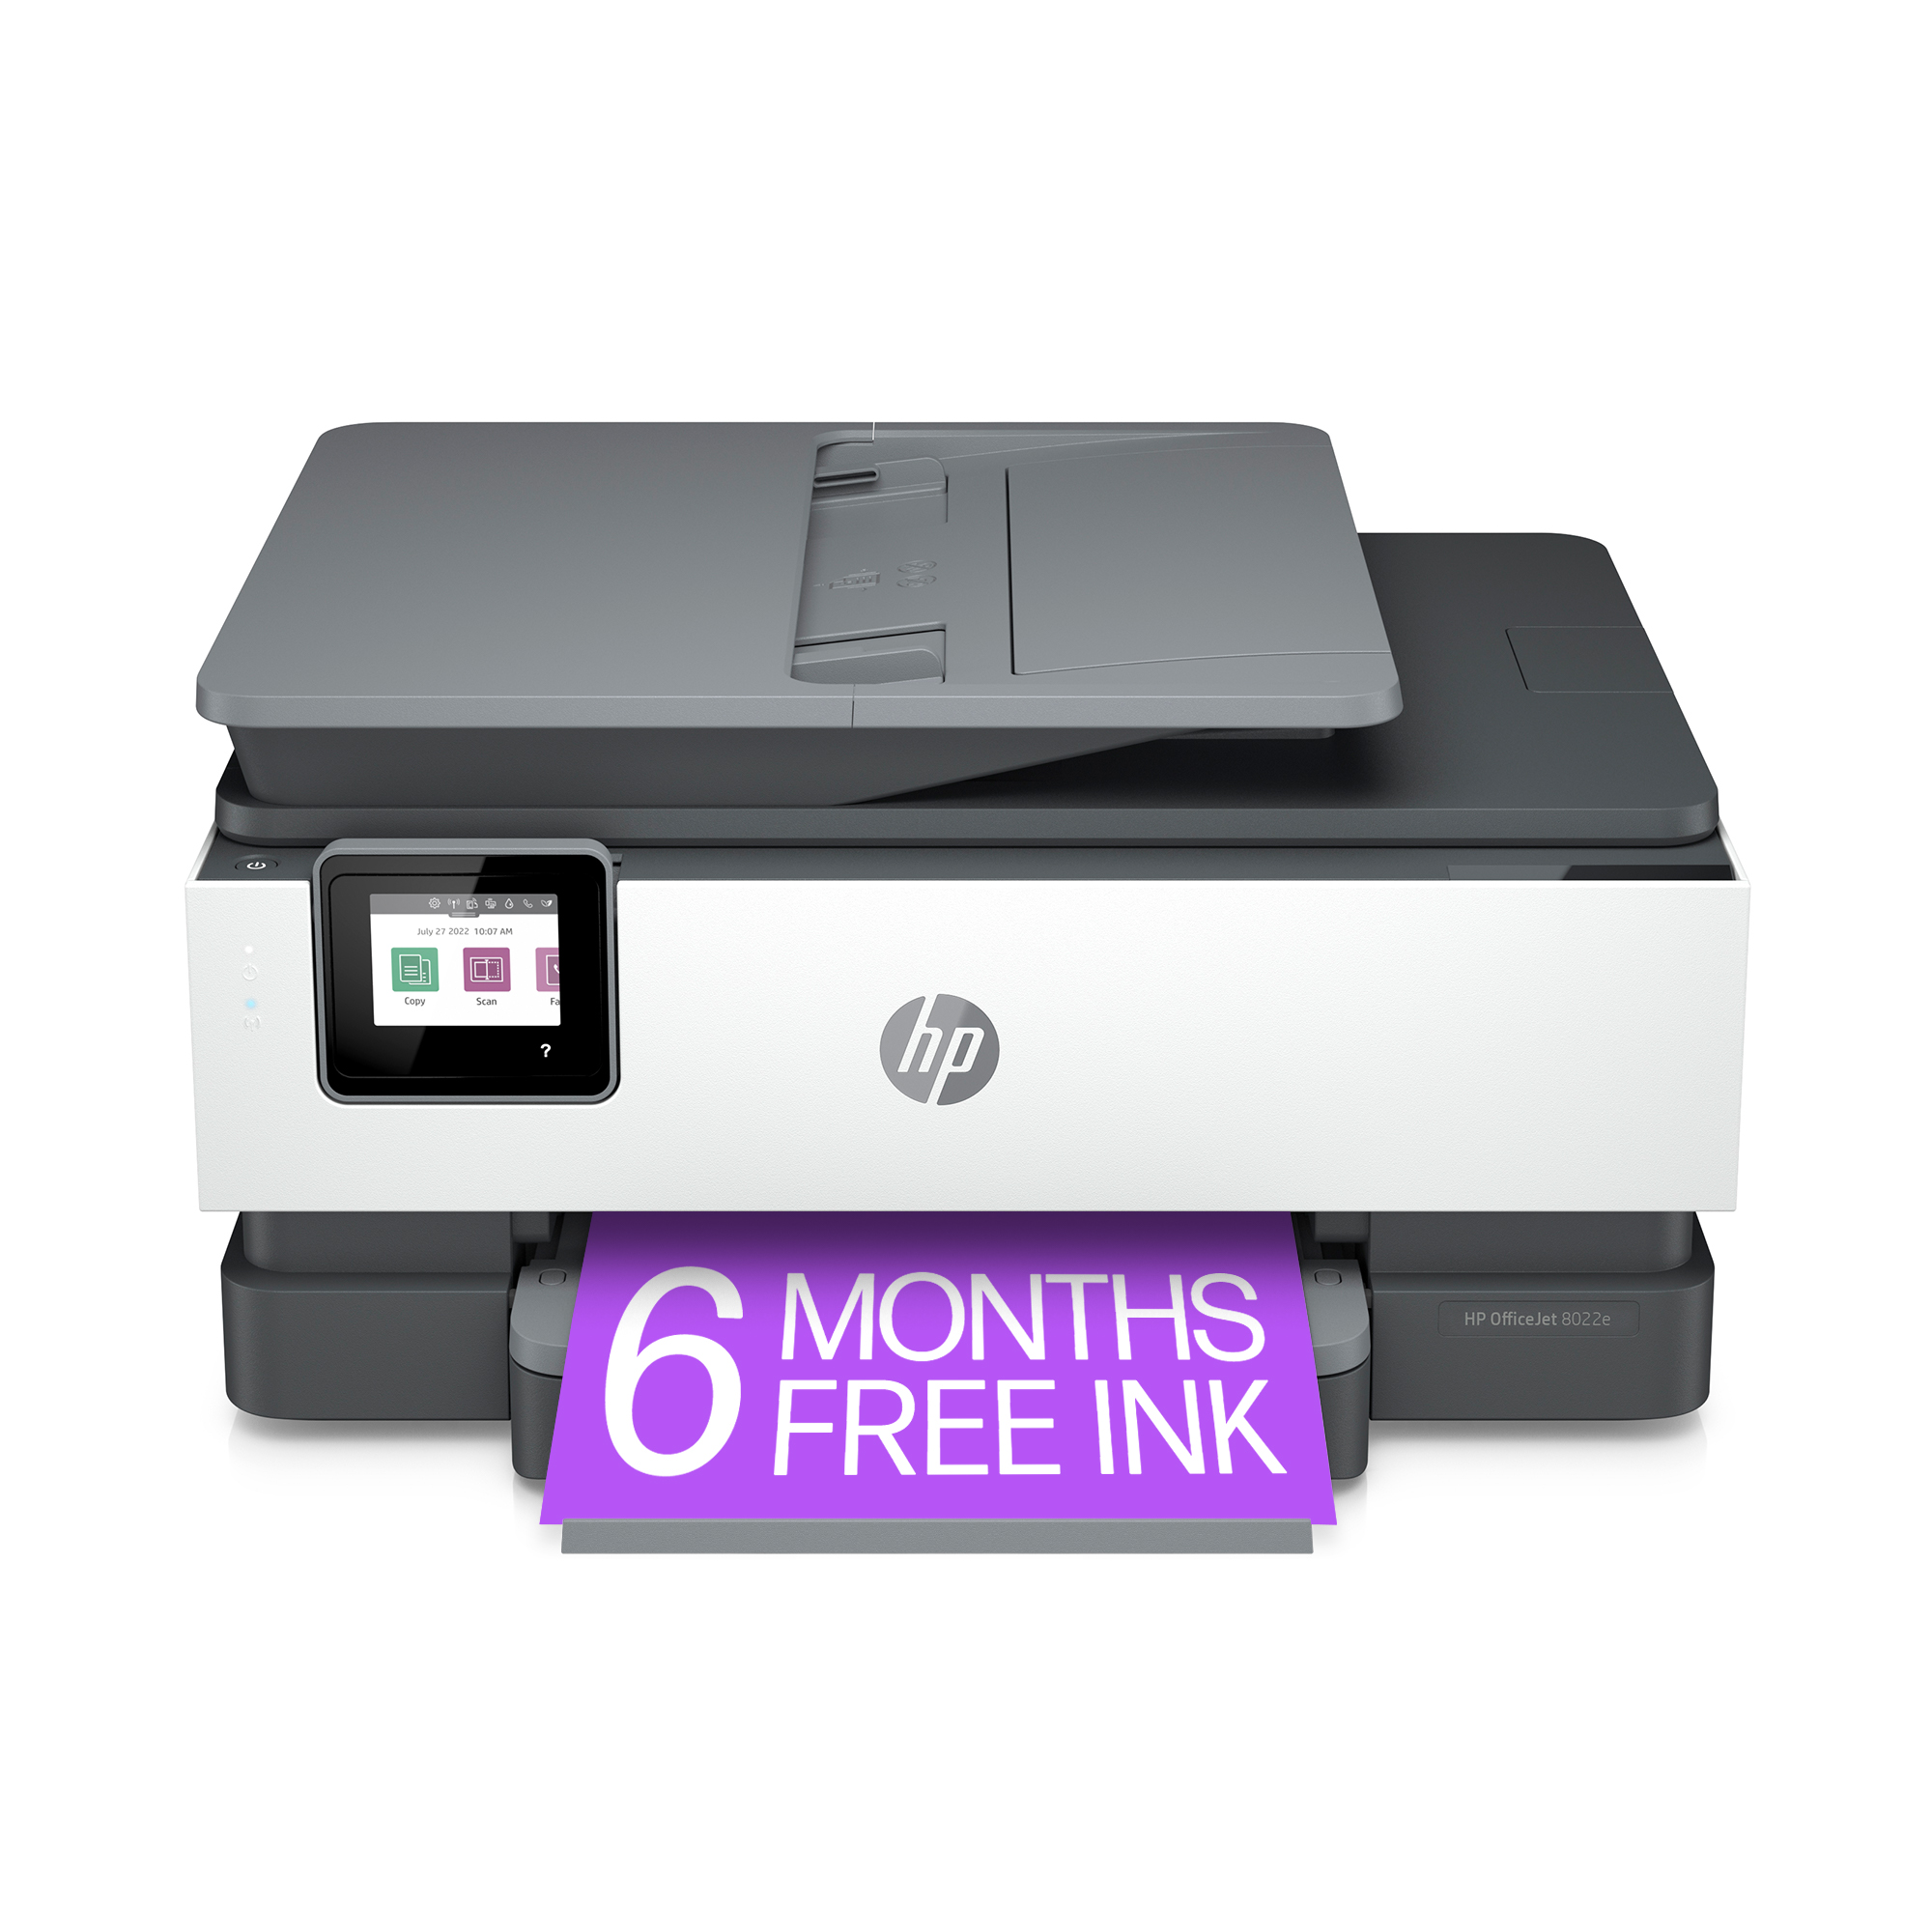 HP OfficeJet 8022e All-in-One - HP+ Free Instant with Ink Printer 6 Inkjet Color Wireless Months